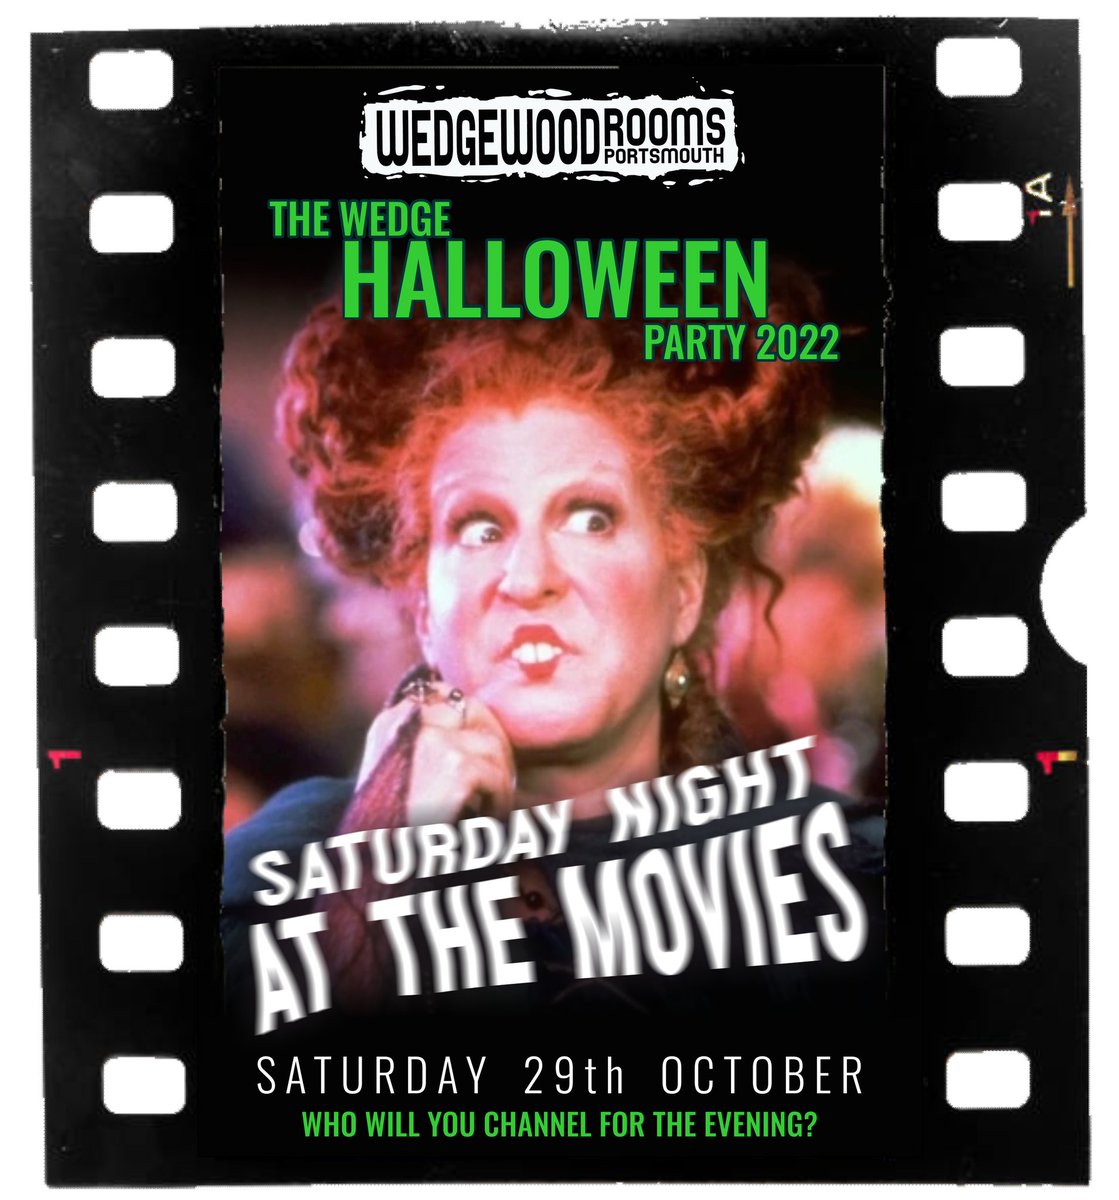 ⚠️THIS WEEKEND⚠️ SATURDAY NIGHT AT THE MOVIES HALLOWEEN PARTY👻😈🎃👽 FREE Entry in costume!